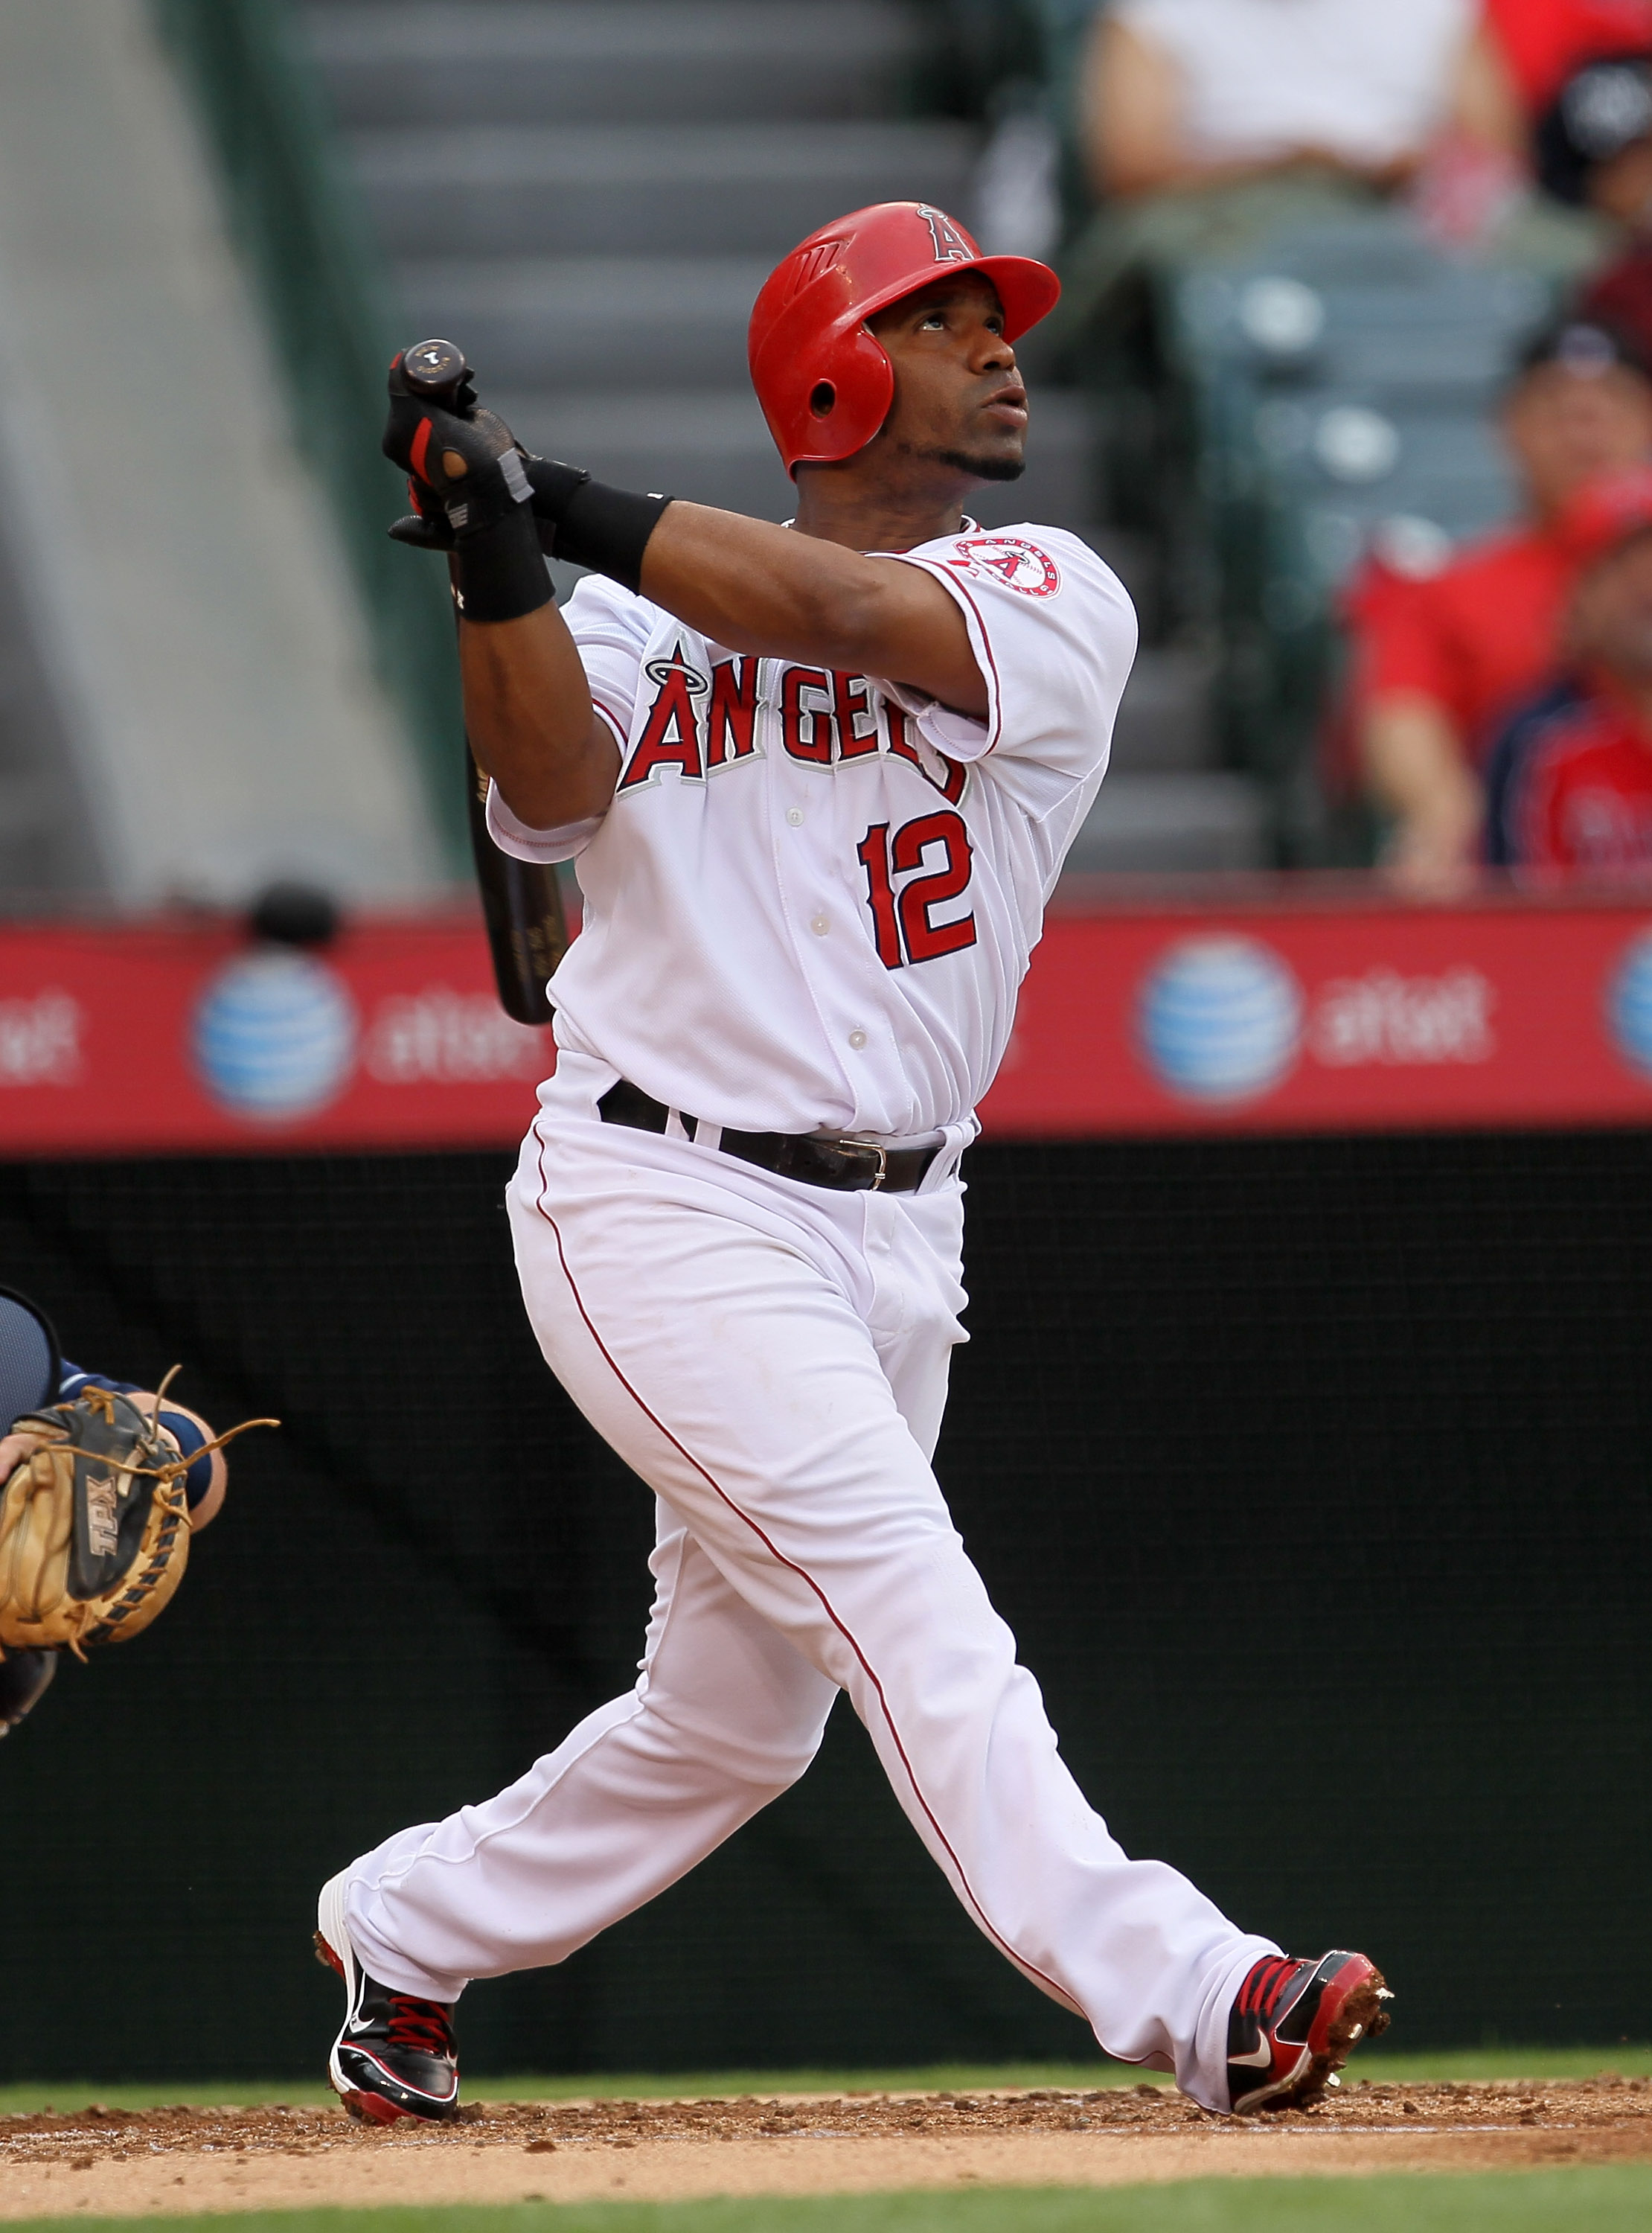 ANAHEIM, CA - SEPTEMBER 08:  Alberto Callaspo #12 of the Los Angeles Angels of Anaheim bats against the Cleveland Indians on September 8, 2010 at Angel Stadium in Anaheim, California.   The Angels won 4-3 in 16 innings.  (Photo by Stephen Dunn/Getty Image